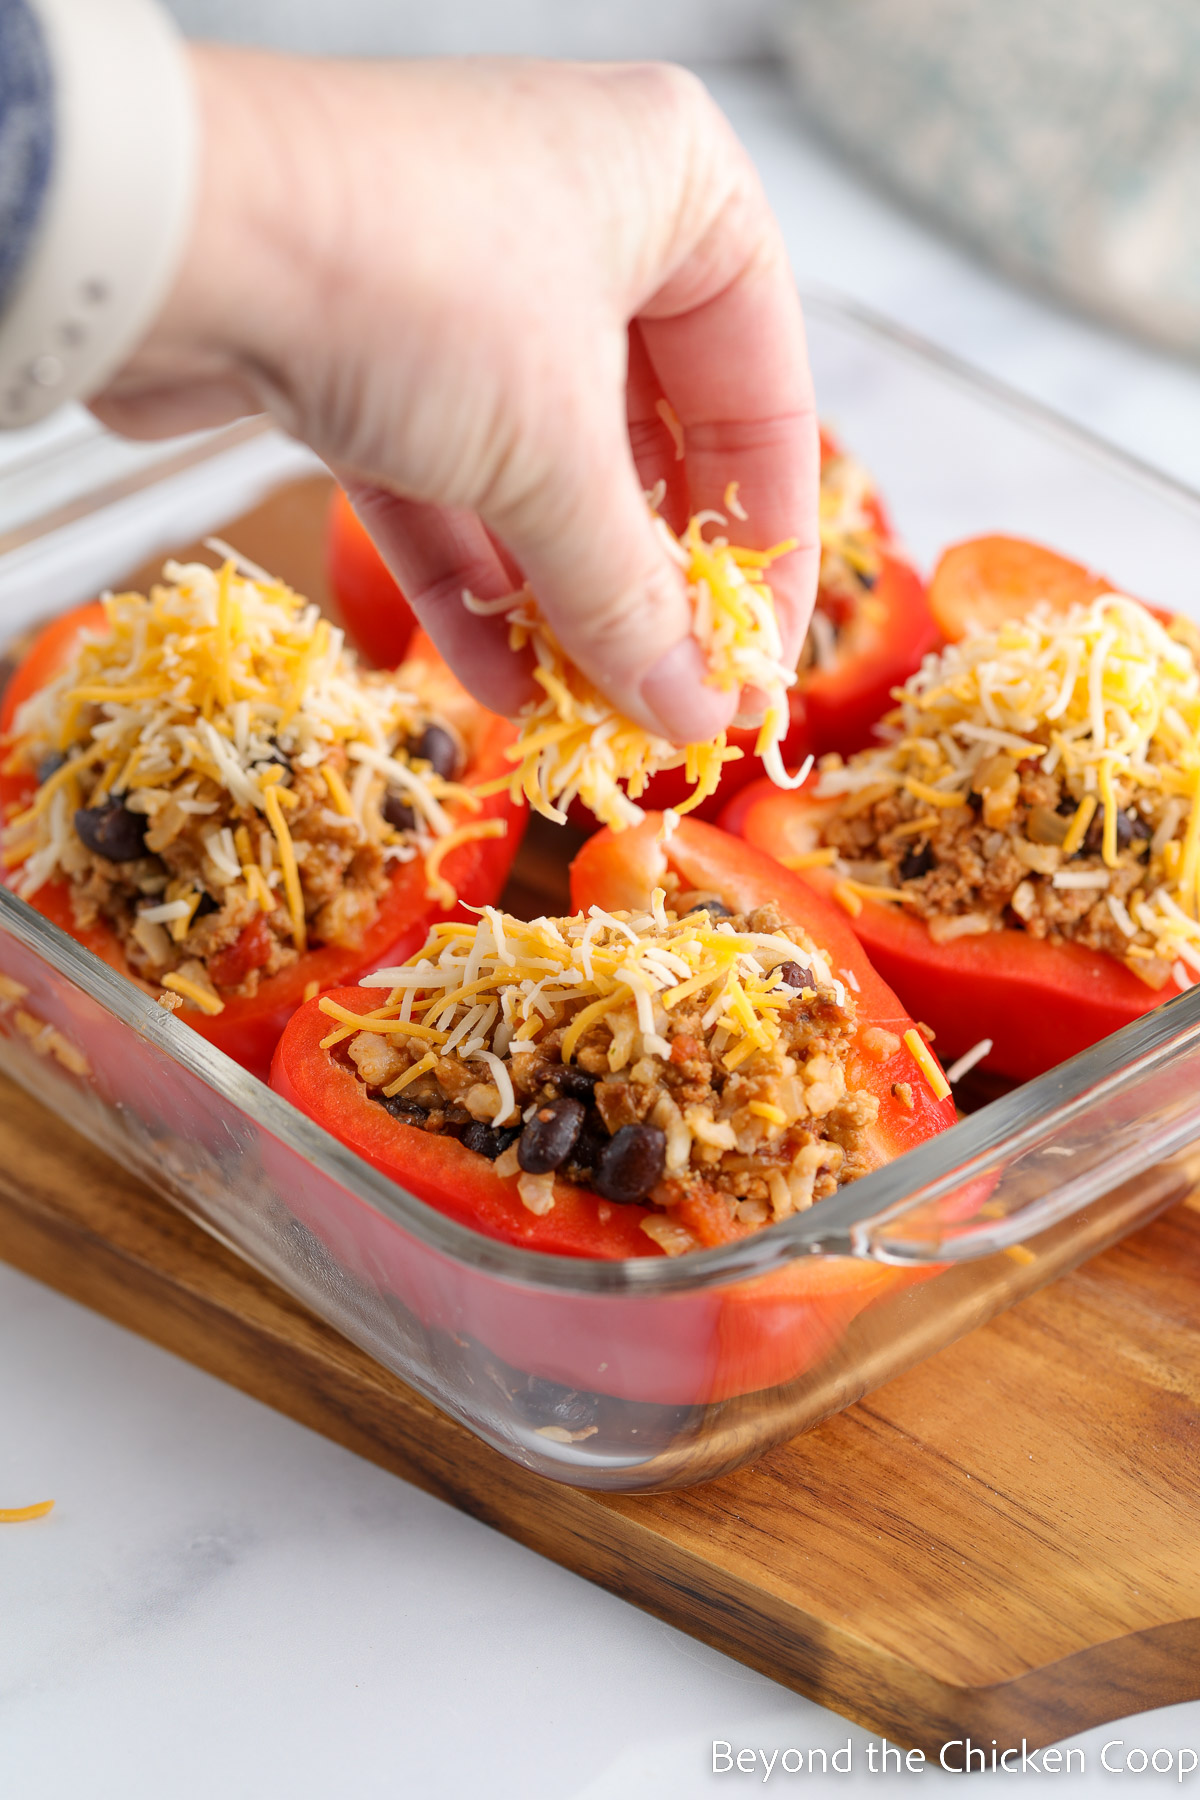 Sprinkling shredded cheese on top of stuffed peppers.